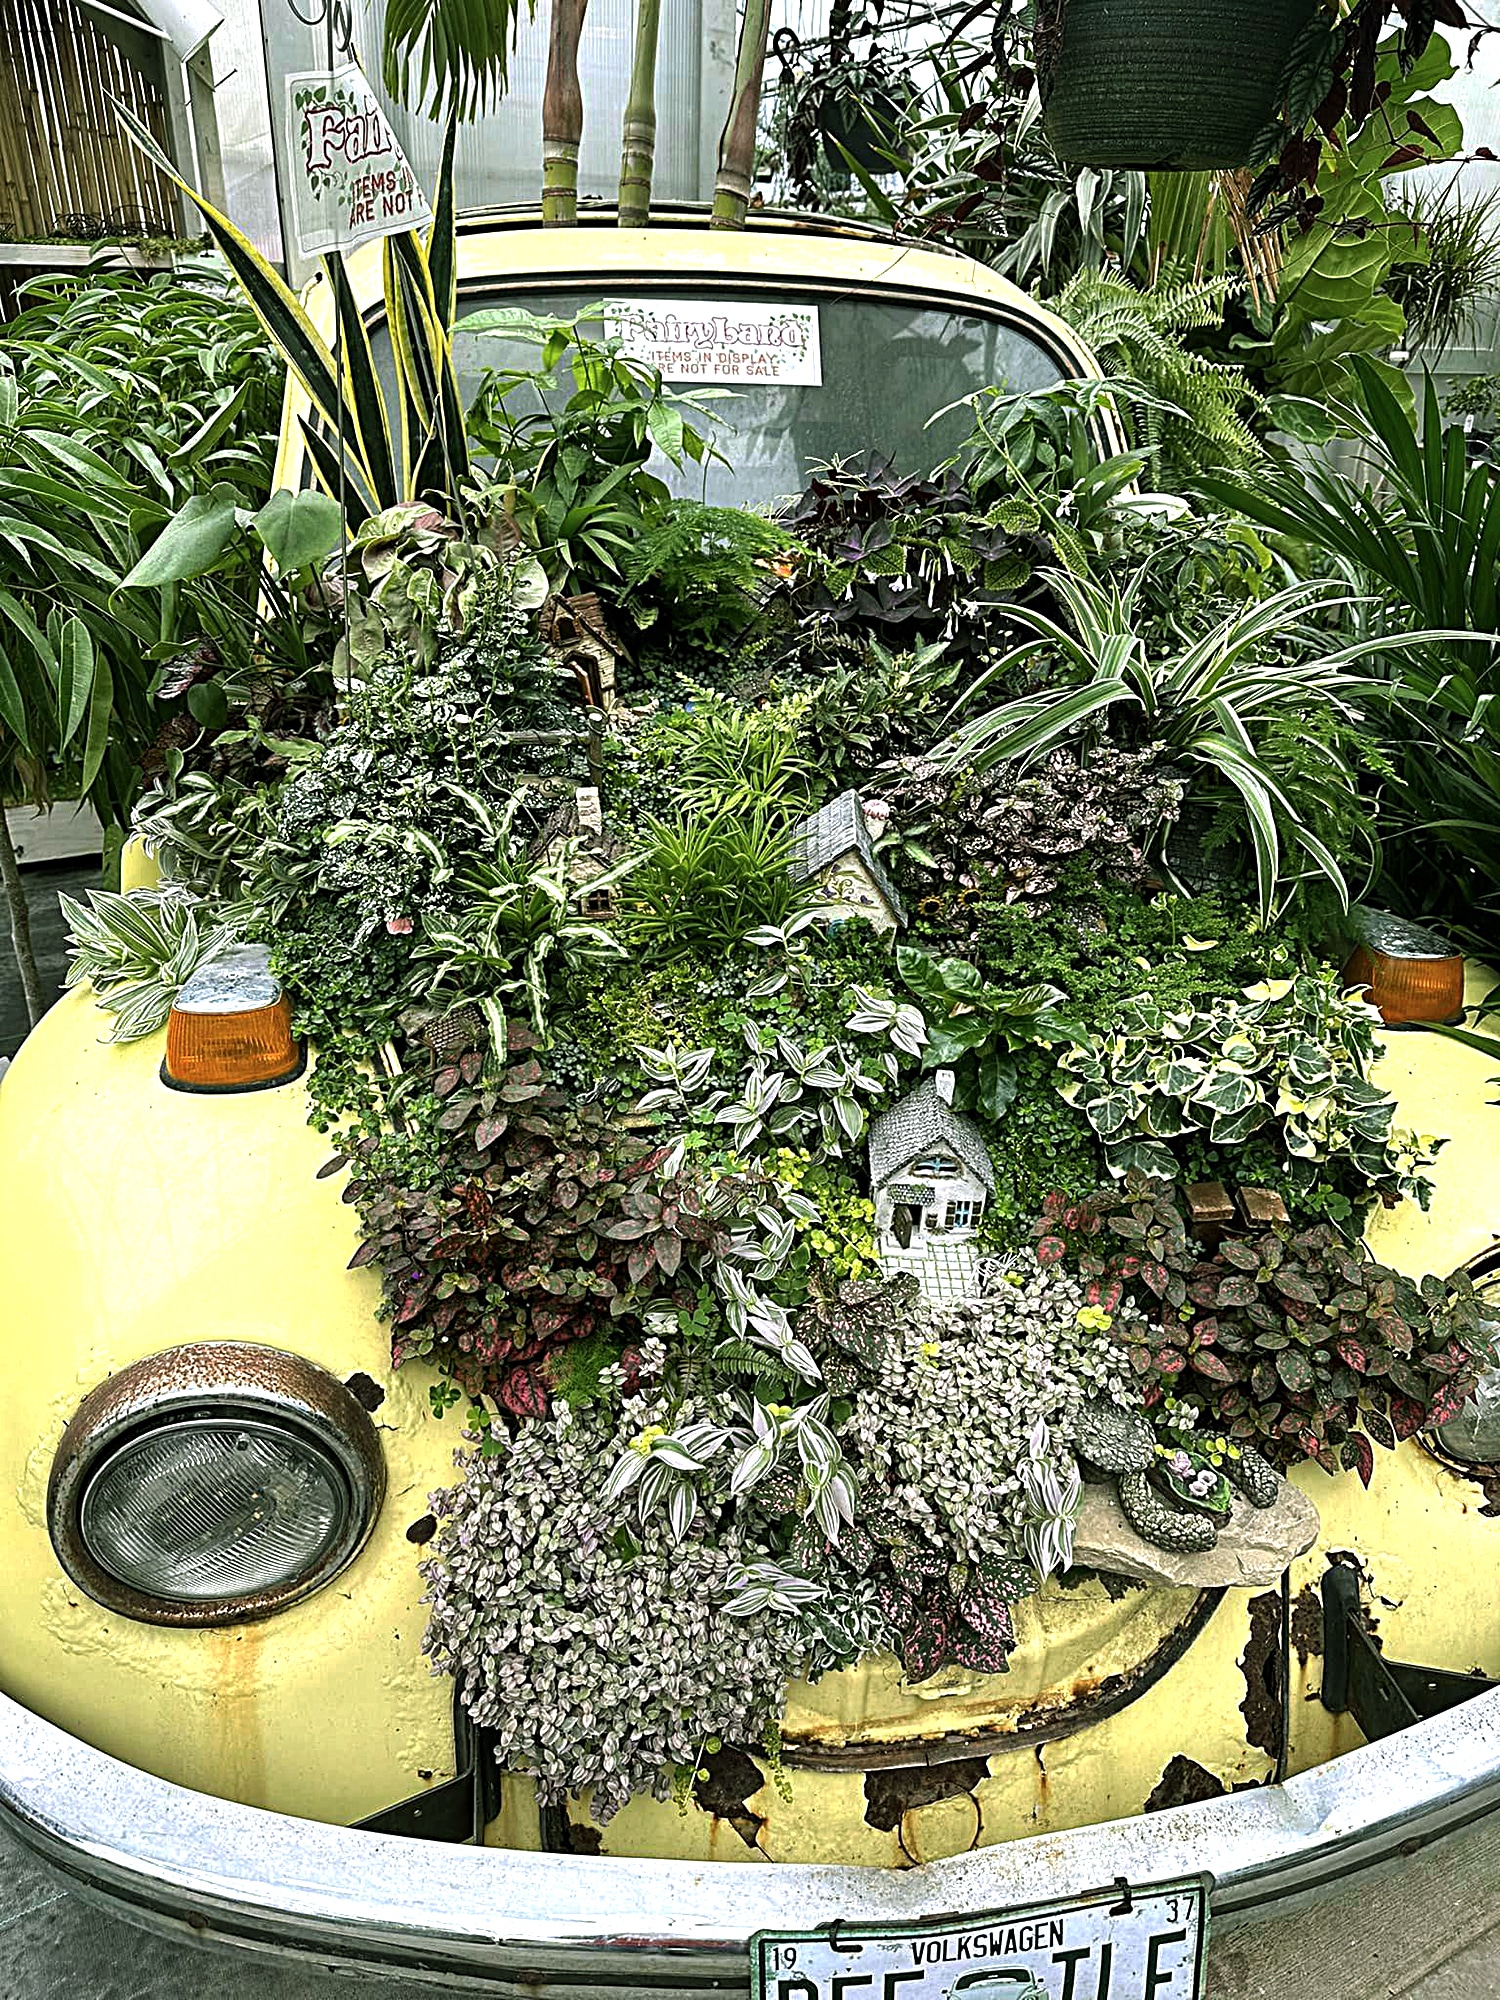 vertical image of a yellow beetle car with plants growing from the hood and trailing over the front at Groovy Plants Ranch. Image via CD, friend of Visit Ohio Today